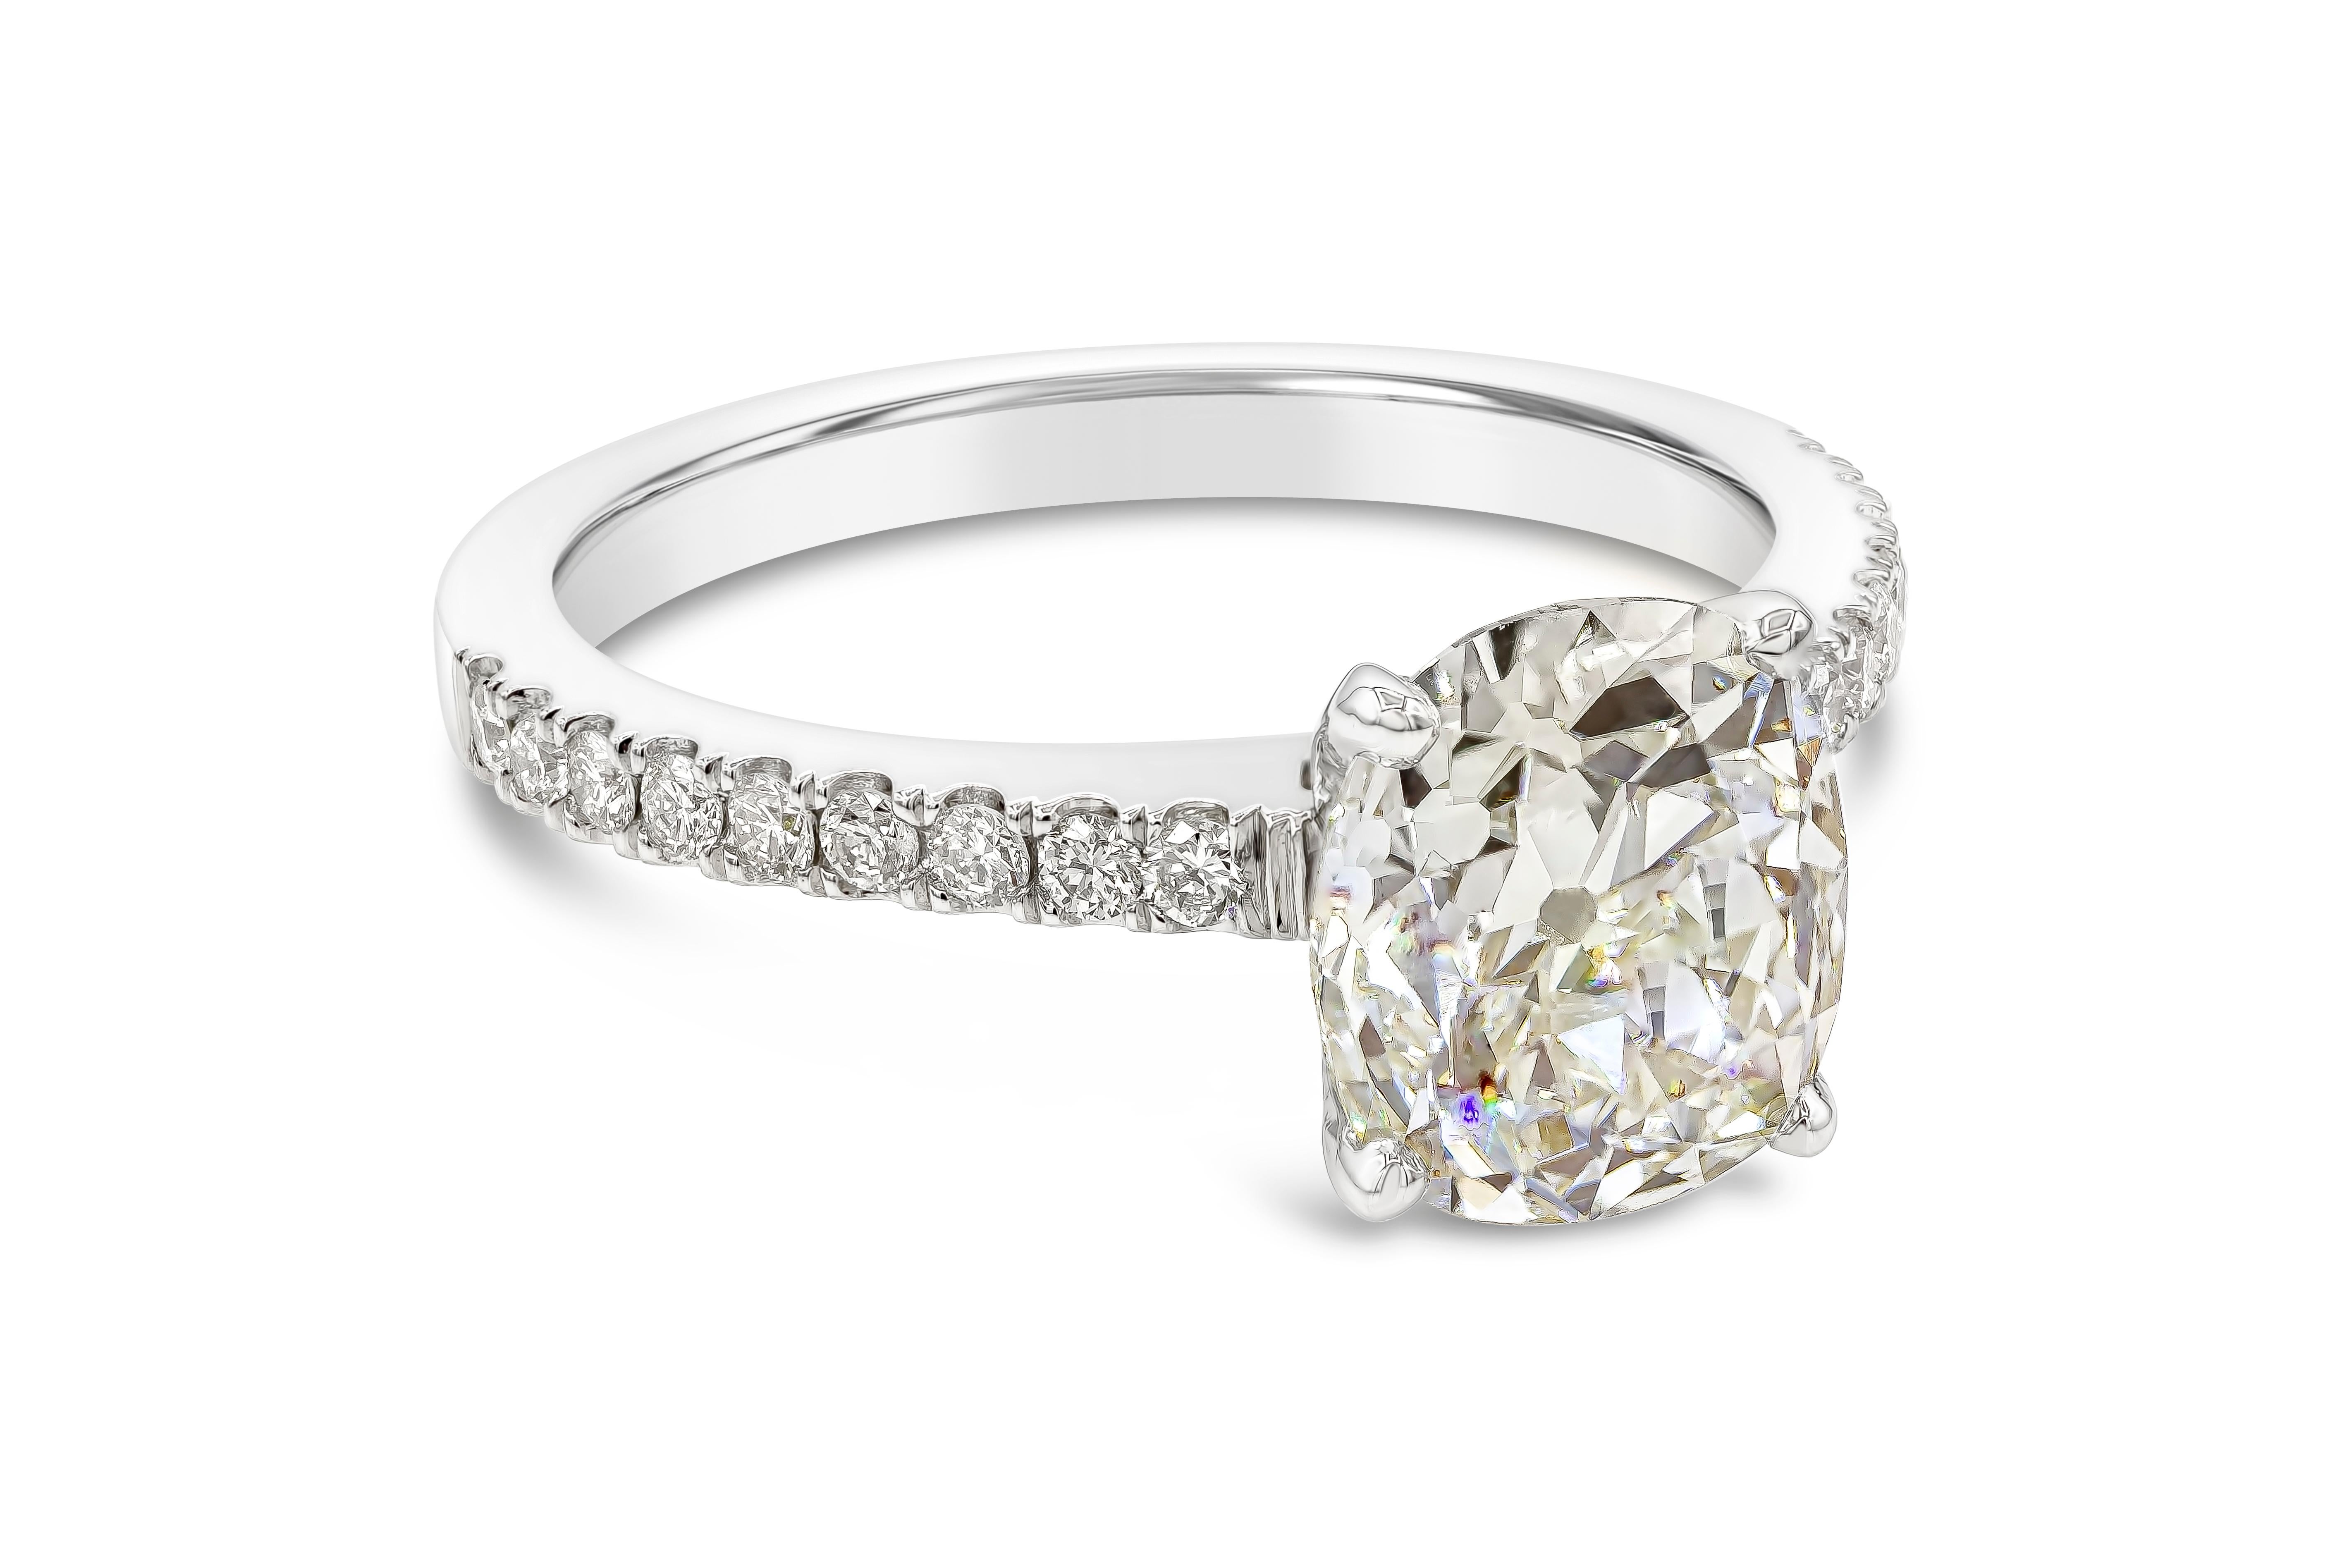 Featuring a 2.36 carat cushion cut diamond center stone set in a simple and timeless pave setting made in platinum. Accent diamonds weigh 0.24 carats total. Center diamond is accompanied by a GIA report stating it is certified as L color, VS1